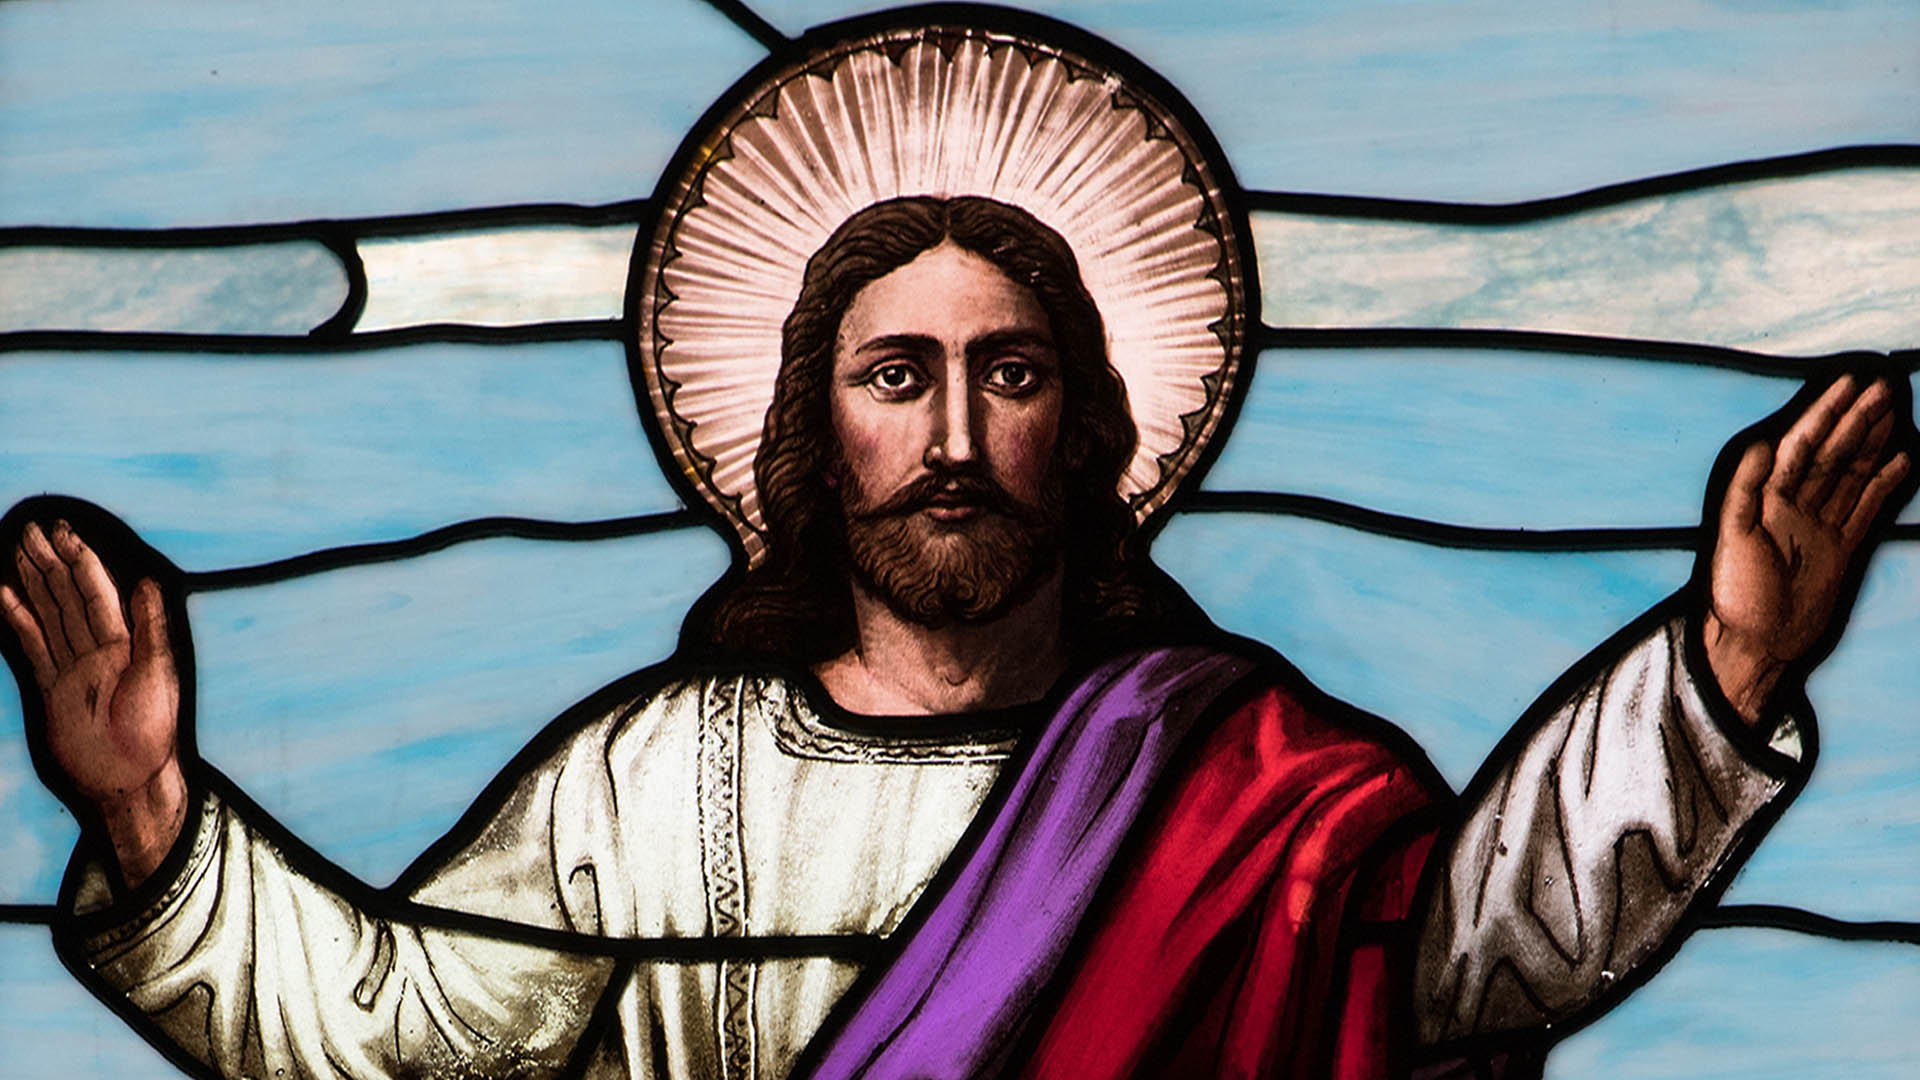 Jesus Christ, as represented in our stained glass window.